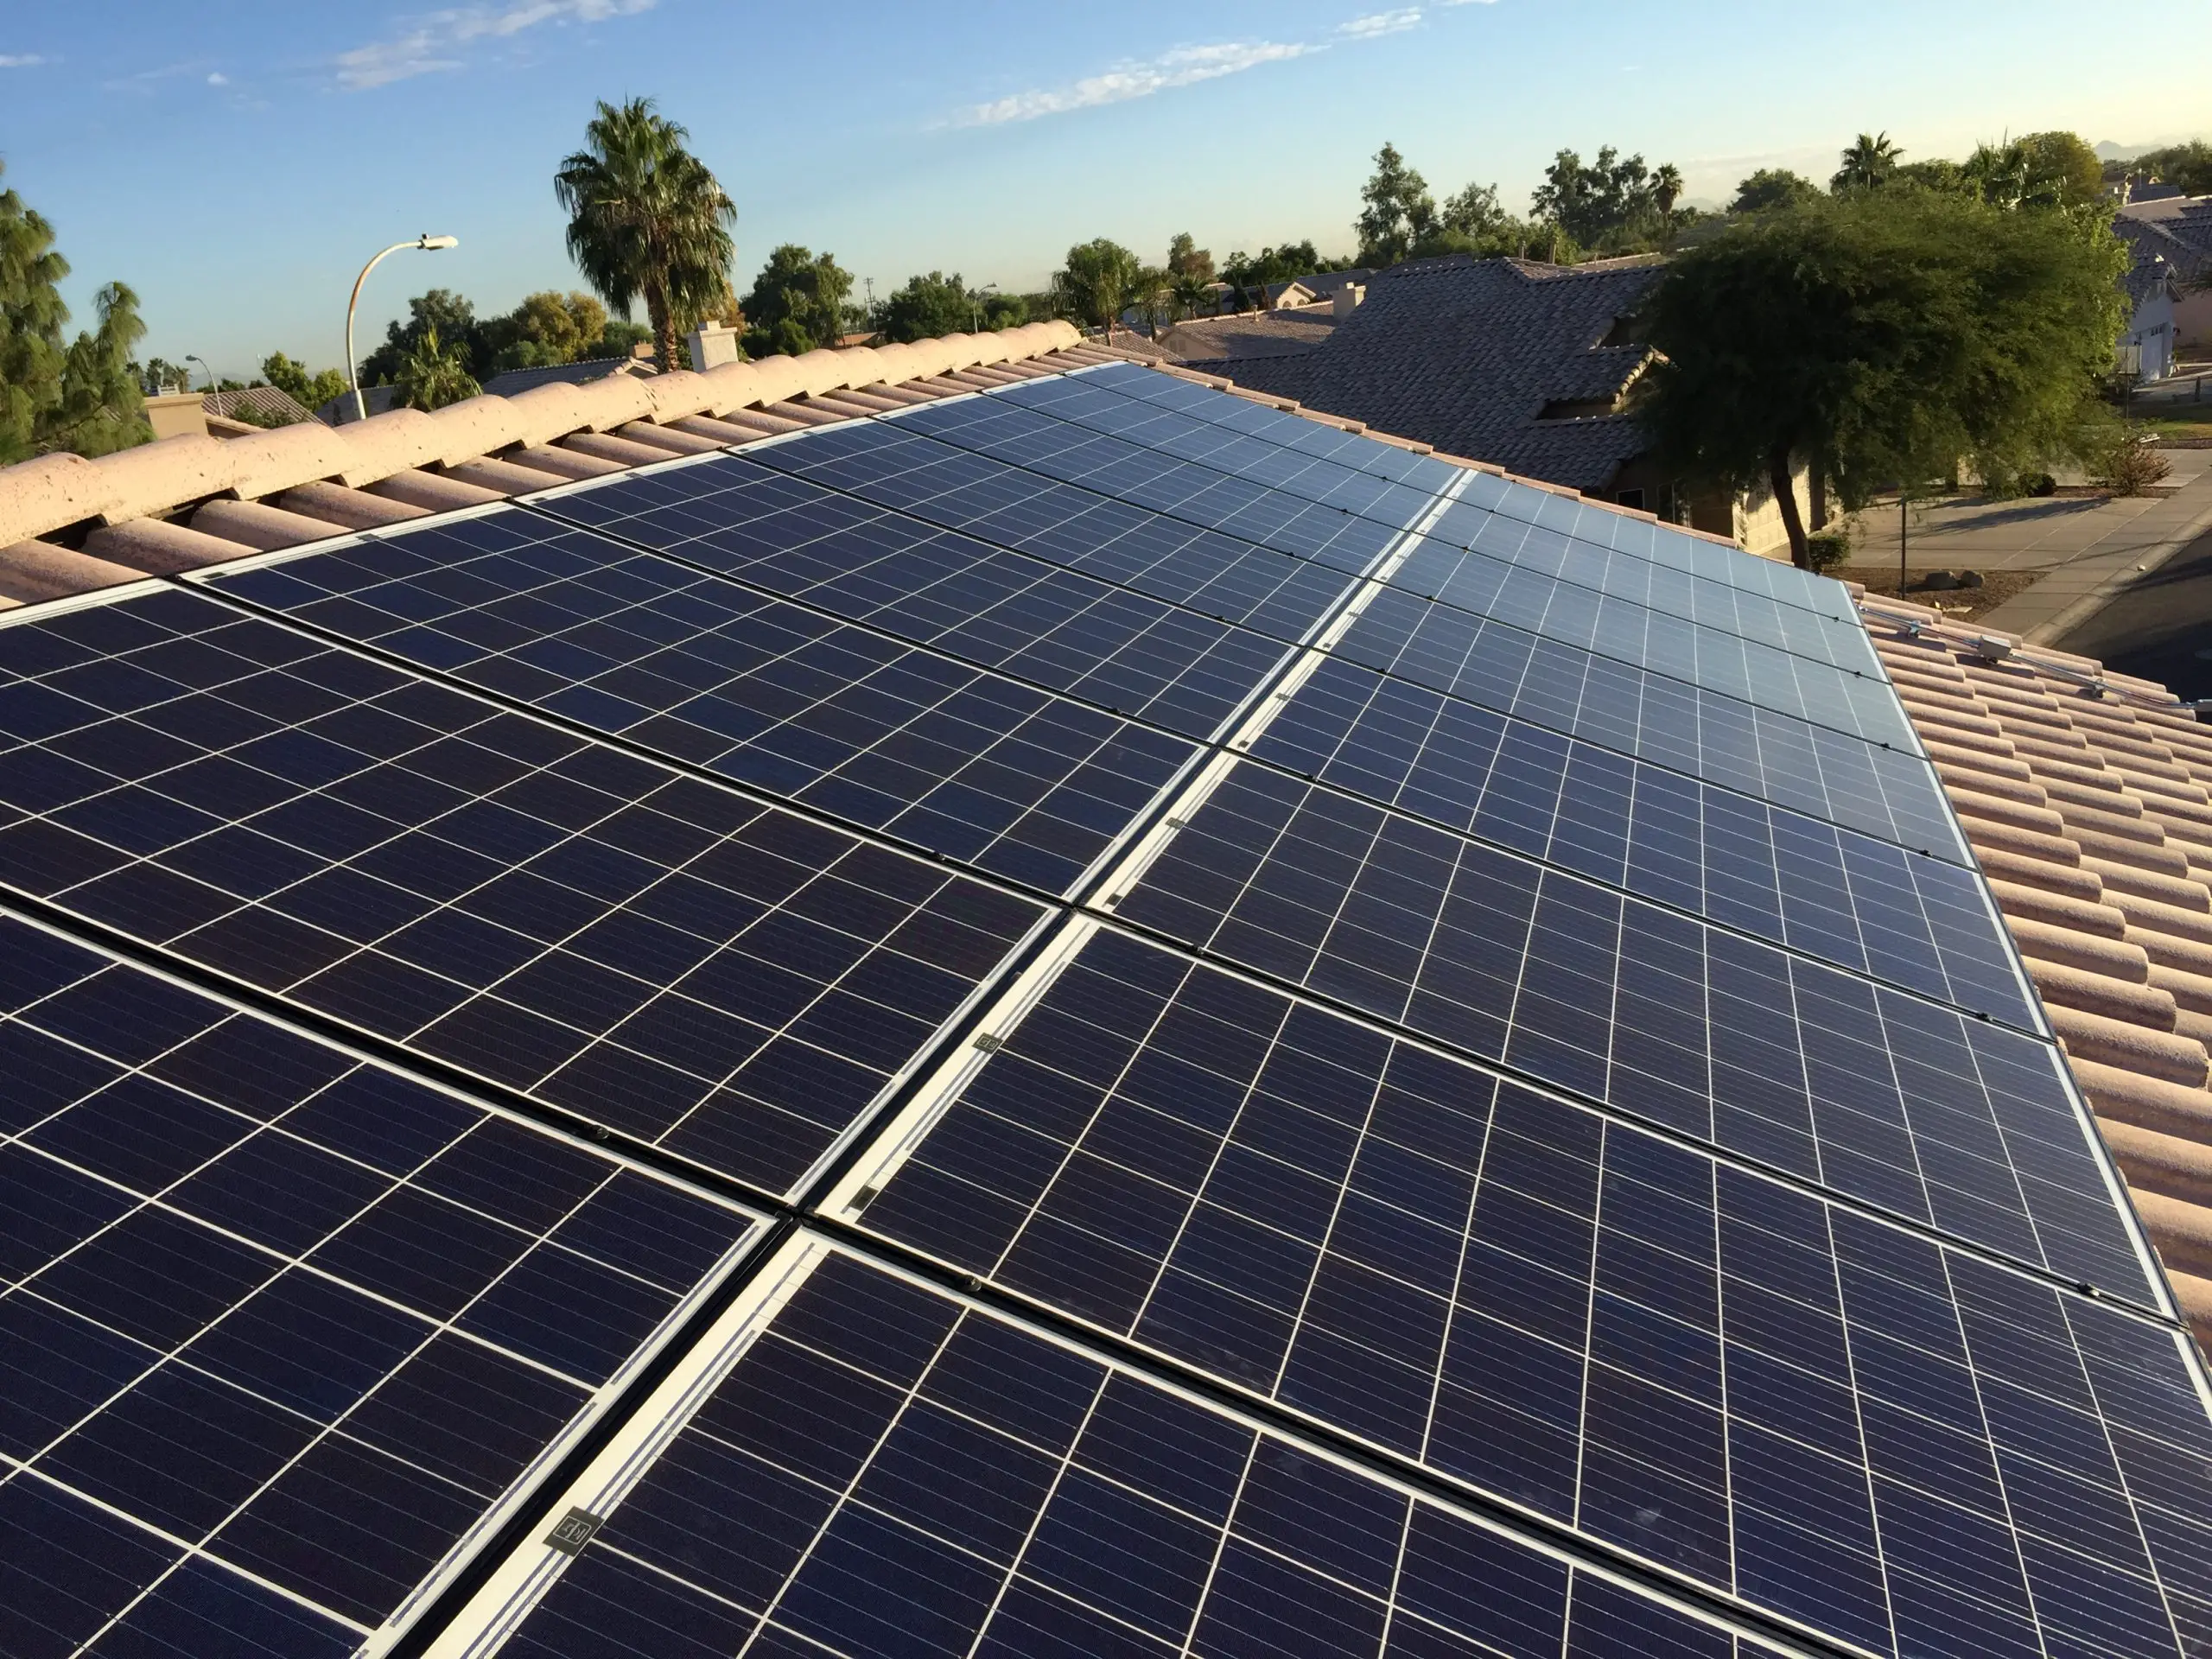 Spanish Tile Roof Mount Solar Panel Installation in Roswell, NM